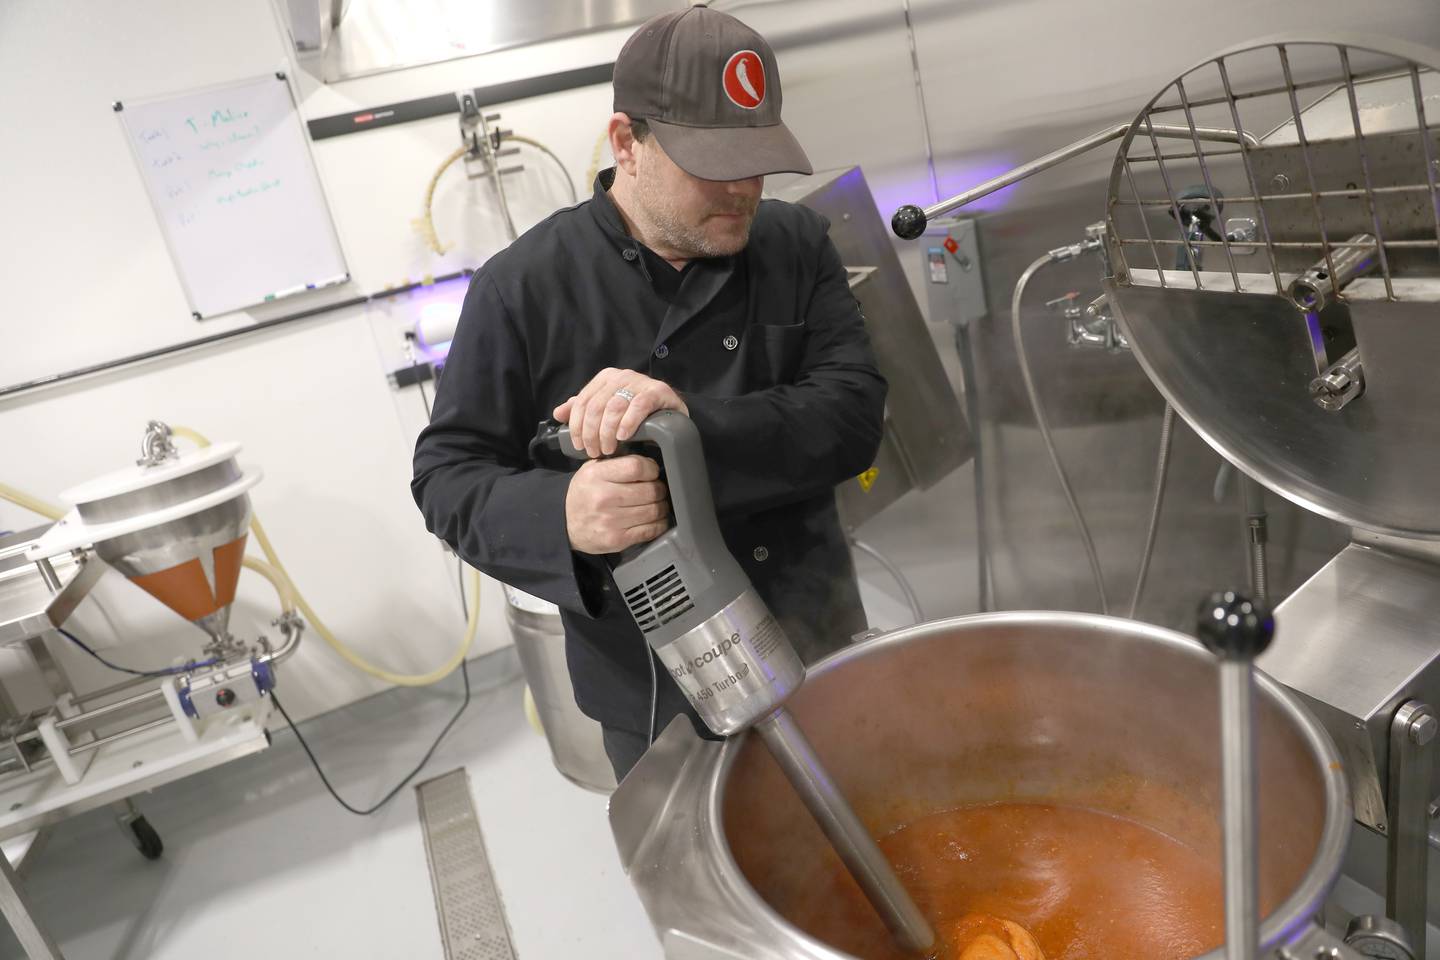 Chris Ginder makes a new batch of hot sauce in the kitchen of the Gindo’s Spice of Life St. Charles headquarters. Gindo’s owners Chris and Mary Ginder each won awards recently from the Small Business Association.